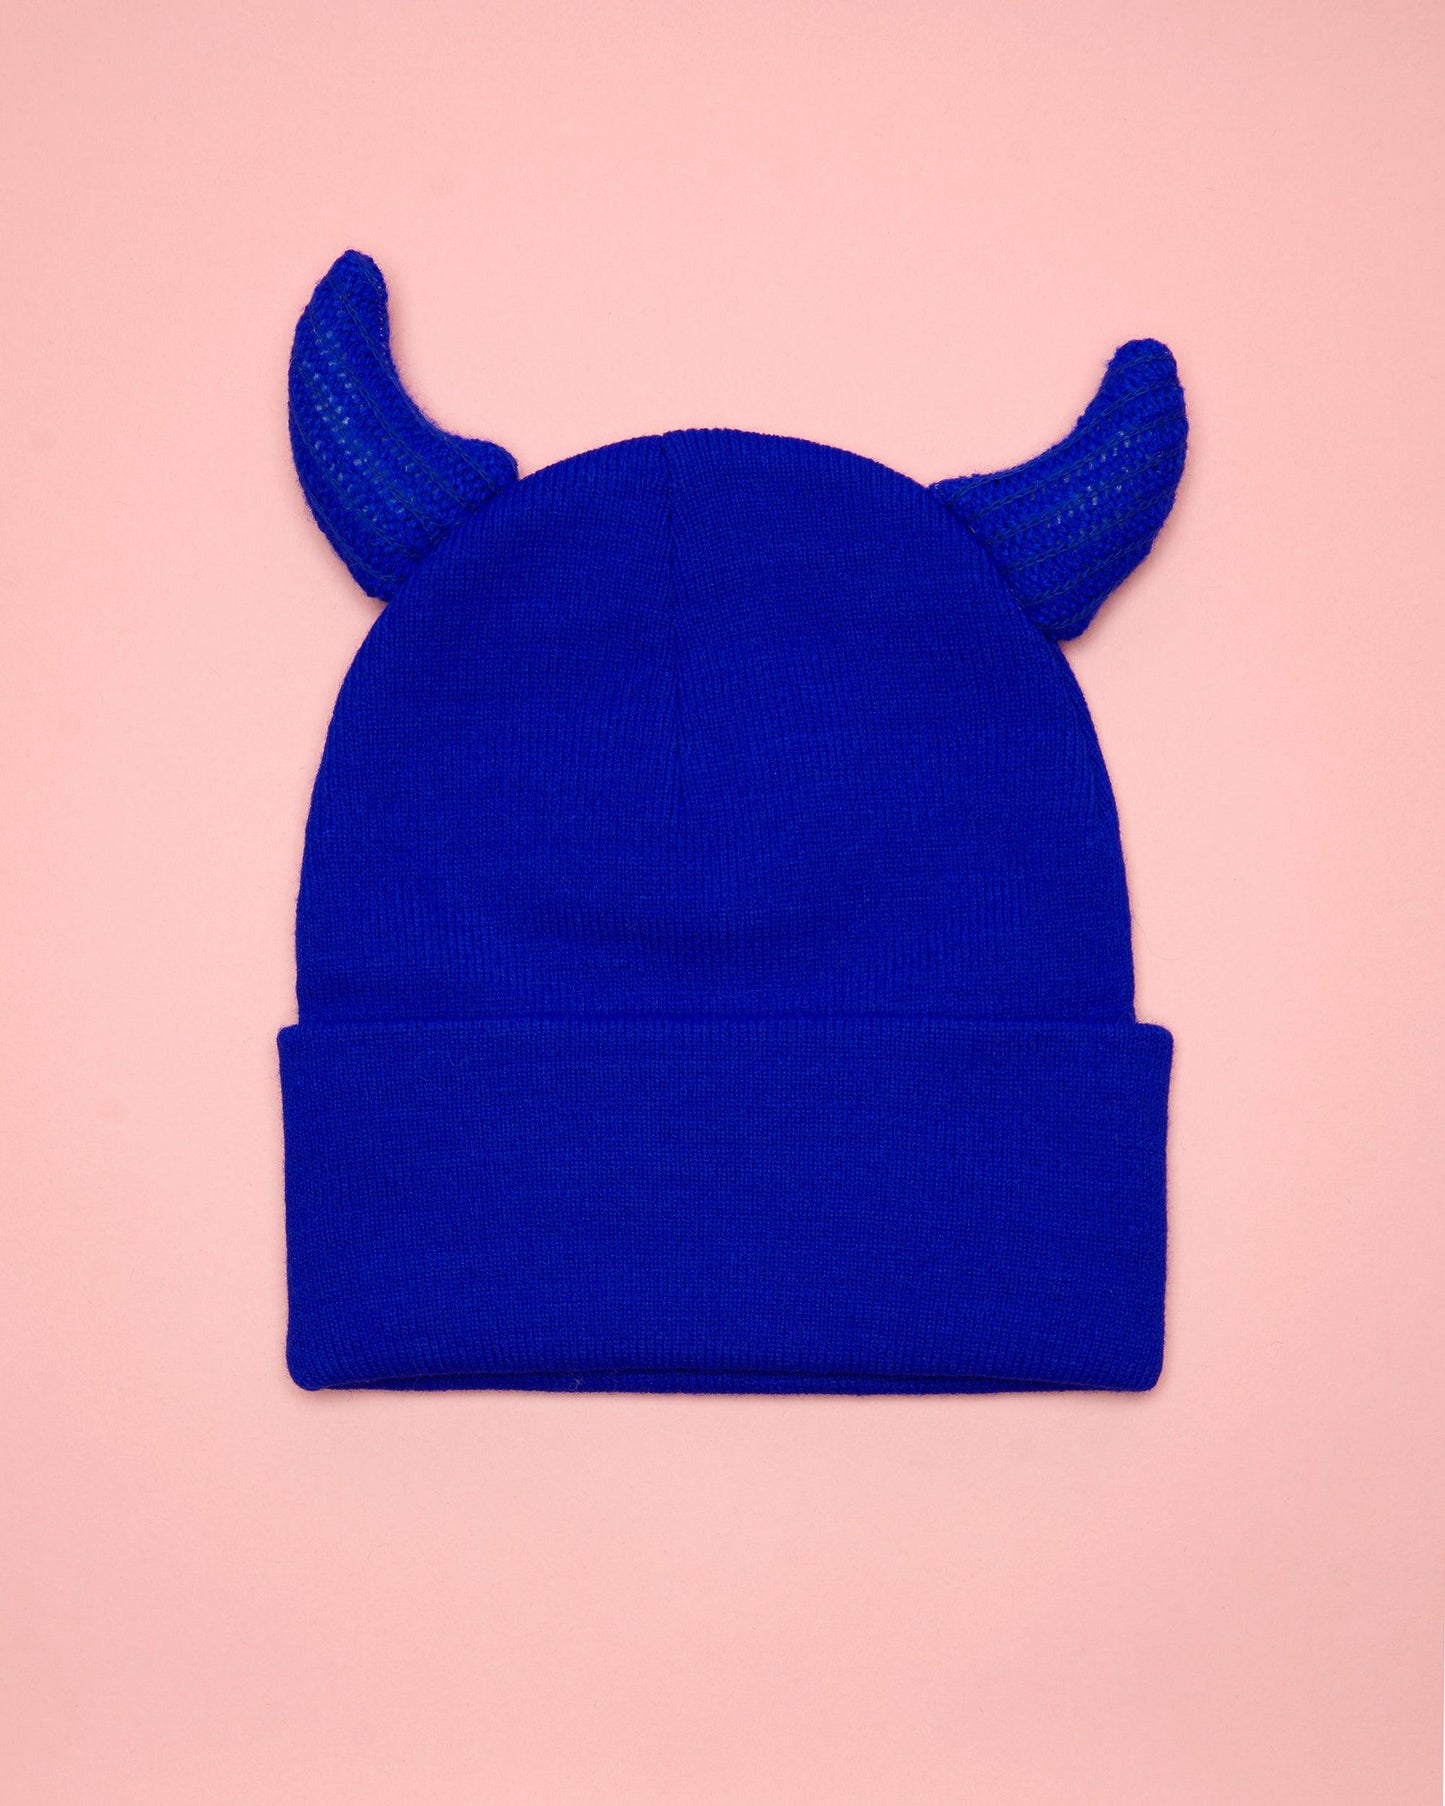 Devilish beanie - blue | One size fits all.